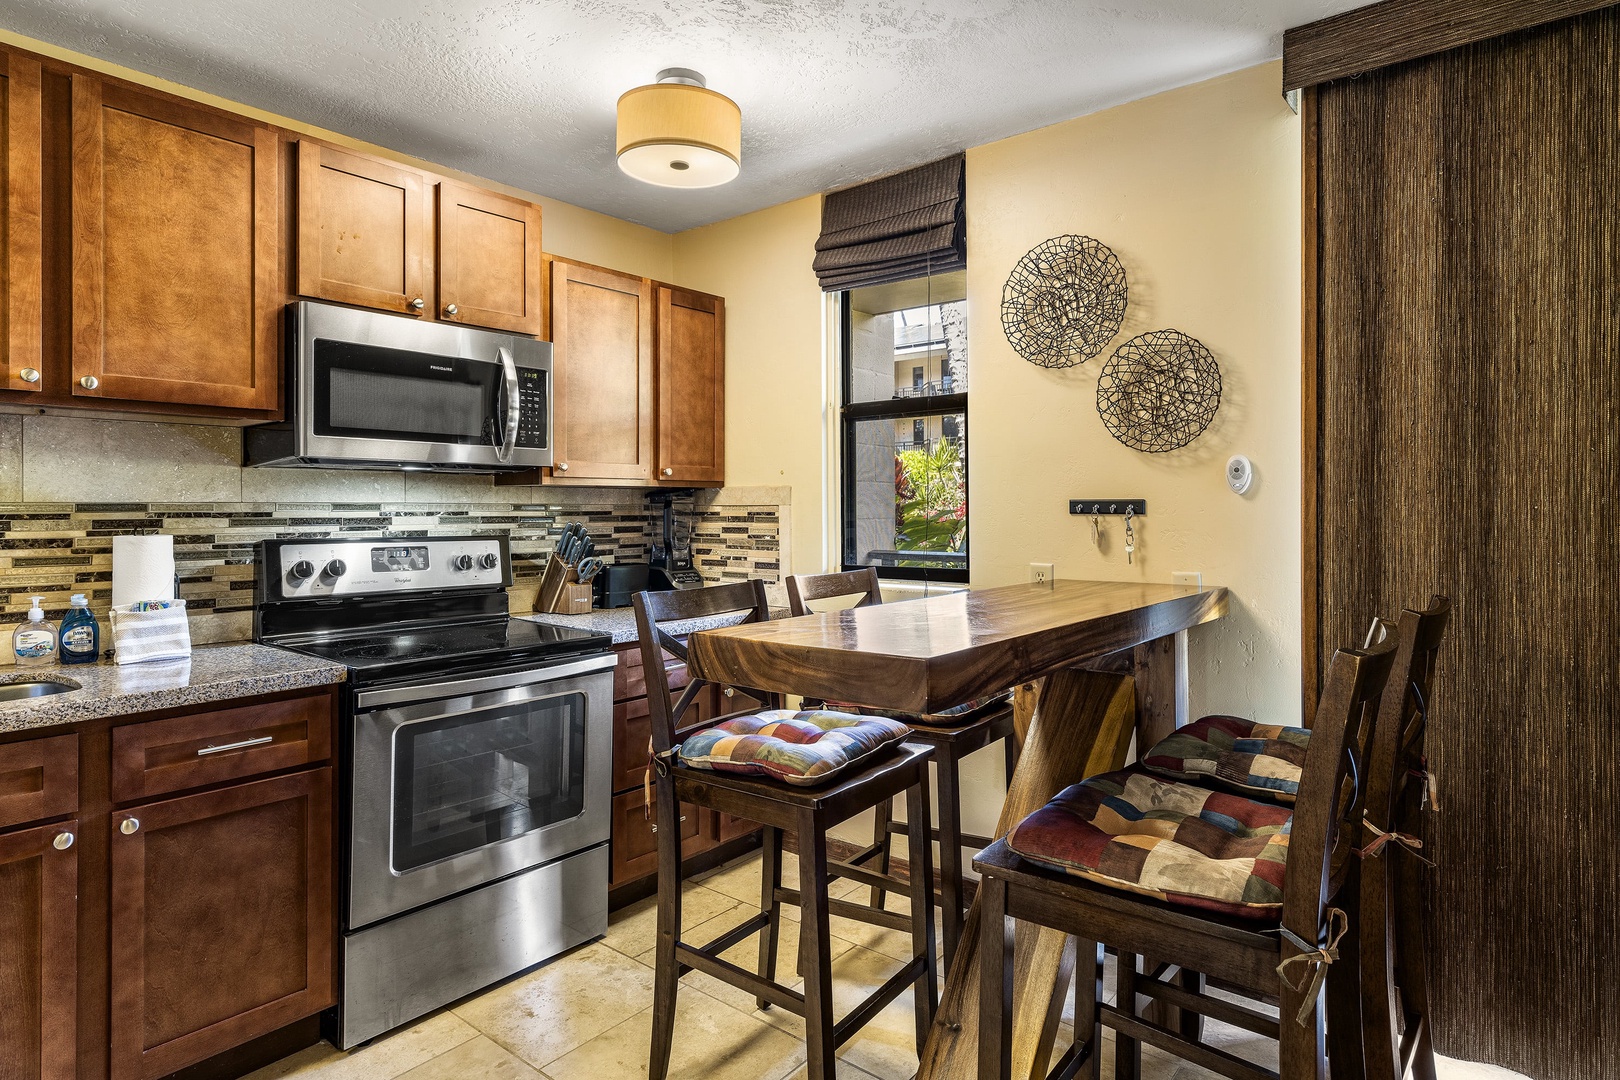 Kailua Kona Vacation Rentals, Kona Makai 2103 - Well equipped kitchen with upgraded features